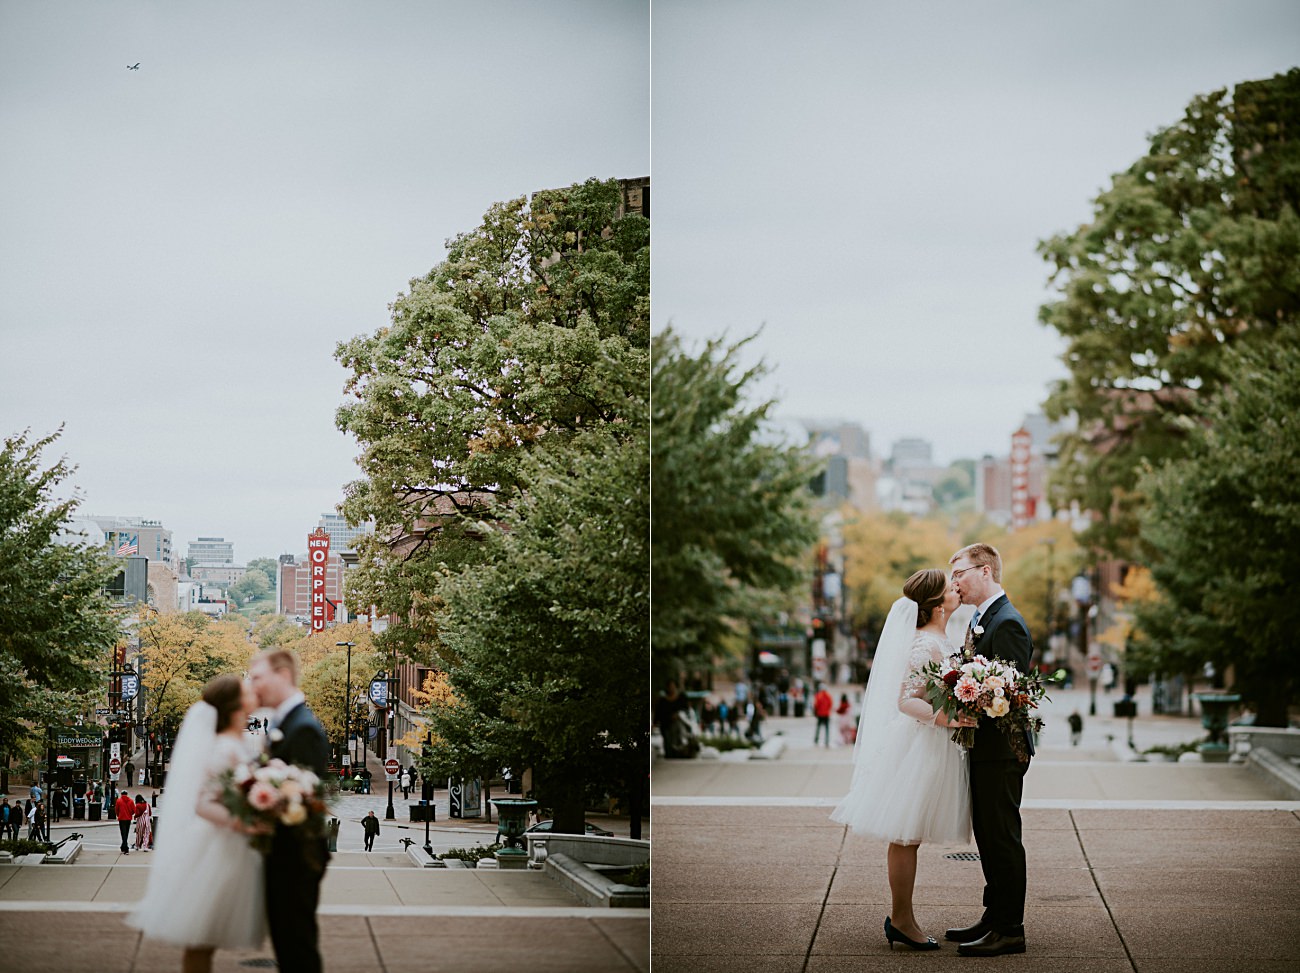 Bride and groom photos at capital, Small Church Wedding, Intimate Wedding In Madison Wisconsin, Madison WI Photographer